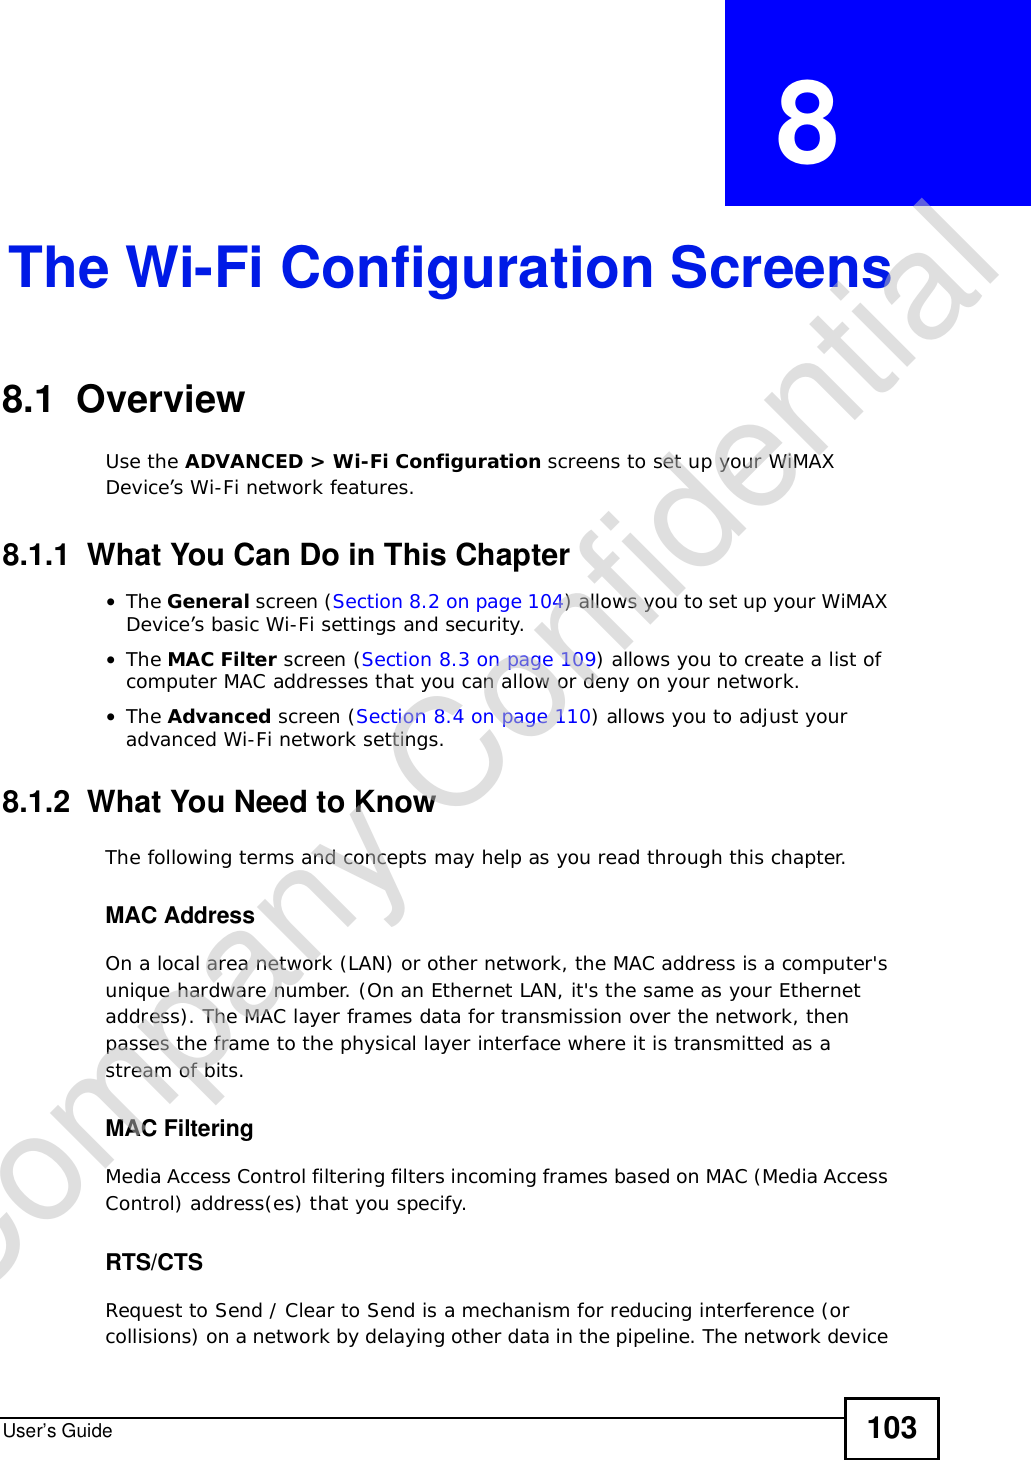 User’s Guide 103CHAPTER  8 The Wi-Fi Configuration Screens8.1  Overview Use the ADVANCED &gt; Wi-Fi Configuration screens to set up your WiMAX Device’s Wi-Fi network features.8.1.1  What You Can Do in This Chapter•The General screen (Section 8.2 on page 104) allows you to set up your WiMAX Device’s basic Wi-Fi settings and security.•The MAC Filter screen (Section 8.3 on page 109) allows you to create a list of computer MAC addresses that you can allow or deny on your network.•The Advanced screen (Section 8.4 on page 110) allows you to adjust your advanced Wi-Fi network settings.8.1.2  What You Need to KnowThe following terms and concepts may help as you read through this chapter.MAC AddressOn a local area network (LAN) or other network, the MAC address is a computer&apos;s unique hardware number. (On an Ethernet LAN, it&apos;s the same as your Ethernet address). The MAC layer frames data for transmission over the network, then passes the frame to the physical layer interface where it is transmitted as a stream of bits.MAC FilteringMedia Access Control filtering filters incoming frames based on MAC (Media Access Control) address(es) that you specify.RTS/CTSRequest to Send / Clear to Send is a mechanism for reducing interference (or collisions) on a network by delaying other data in the pipeline. The network device Company Confidential